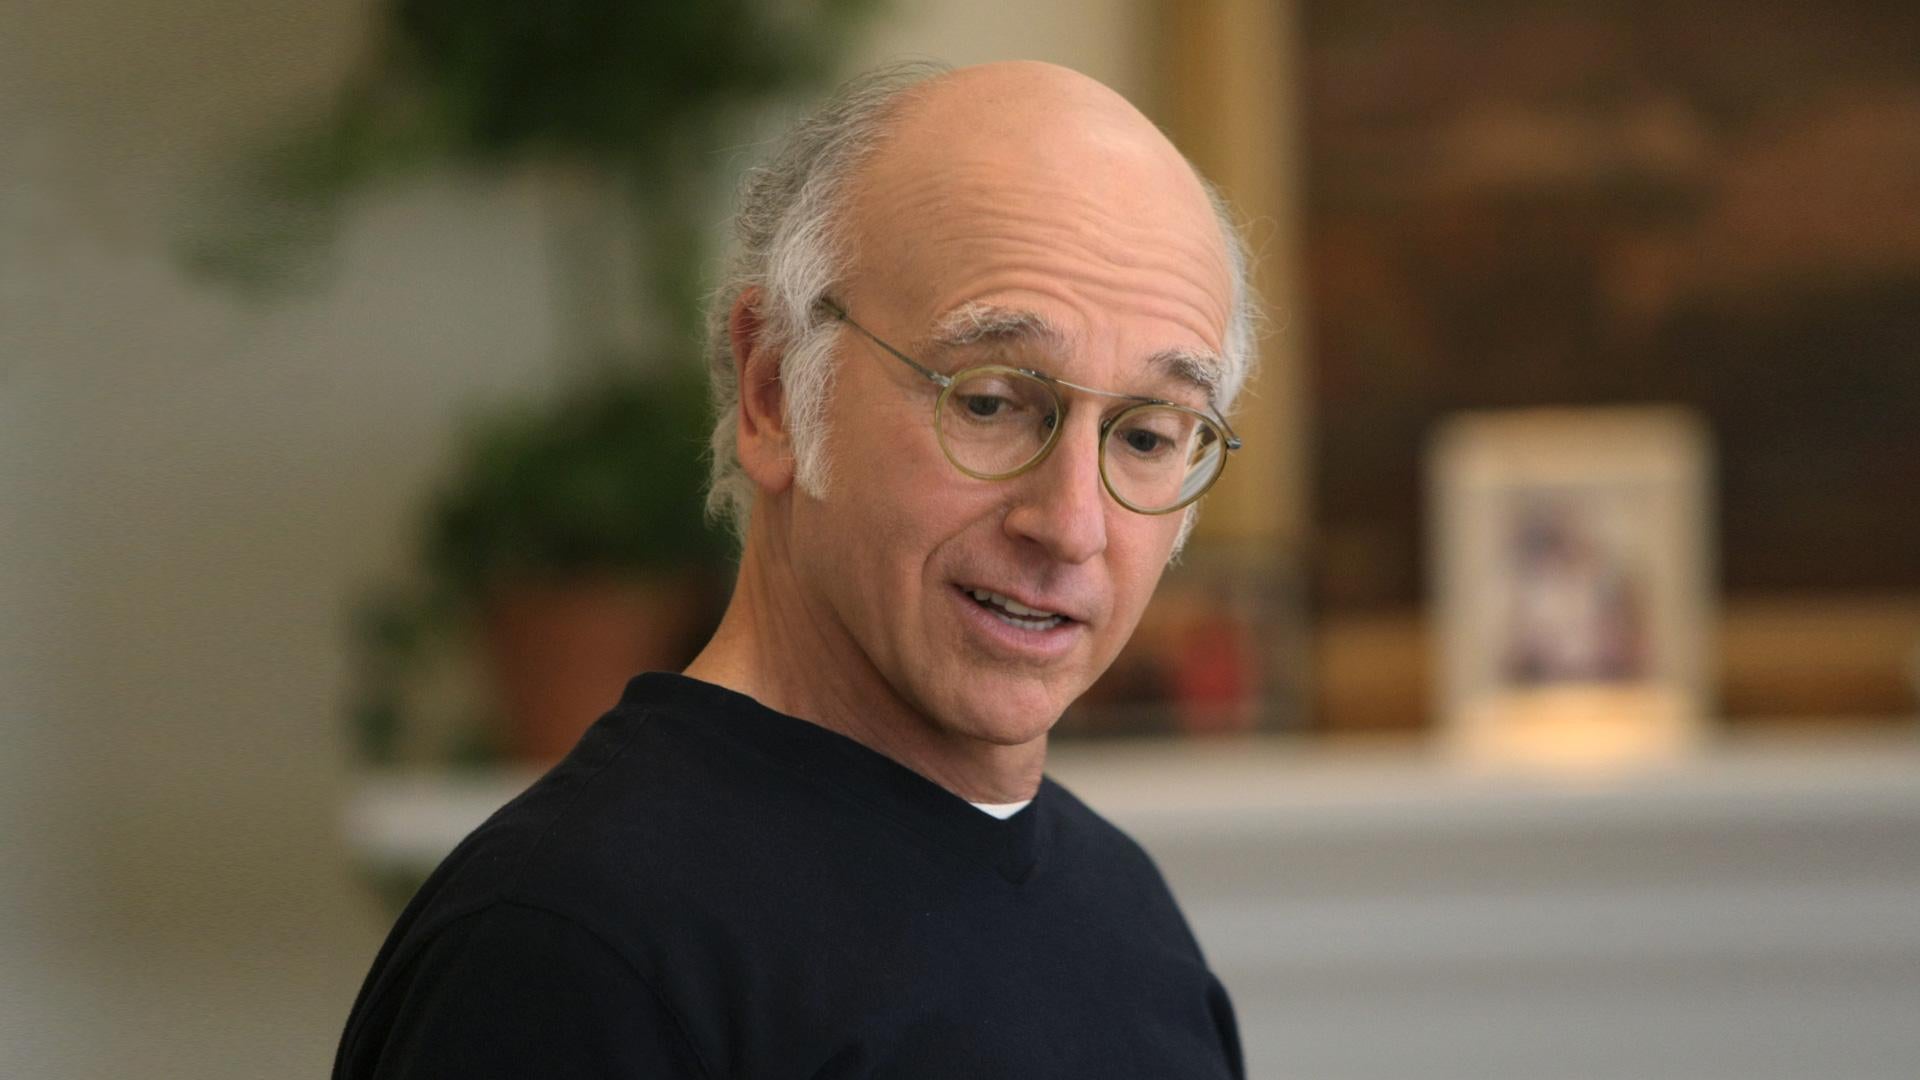 Curb Your Enthusiasm season 9: Larry David will be back in new episodes, HBO confirms ...